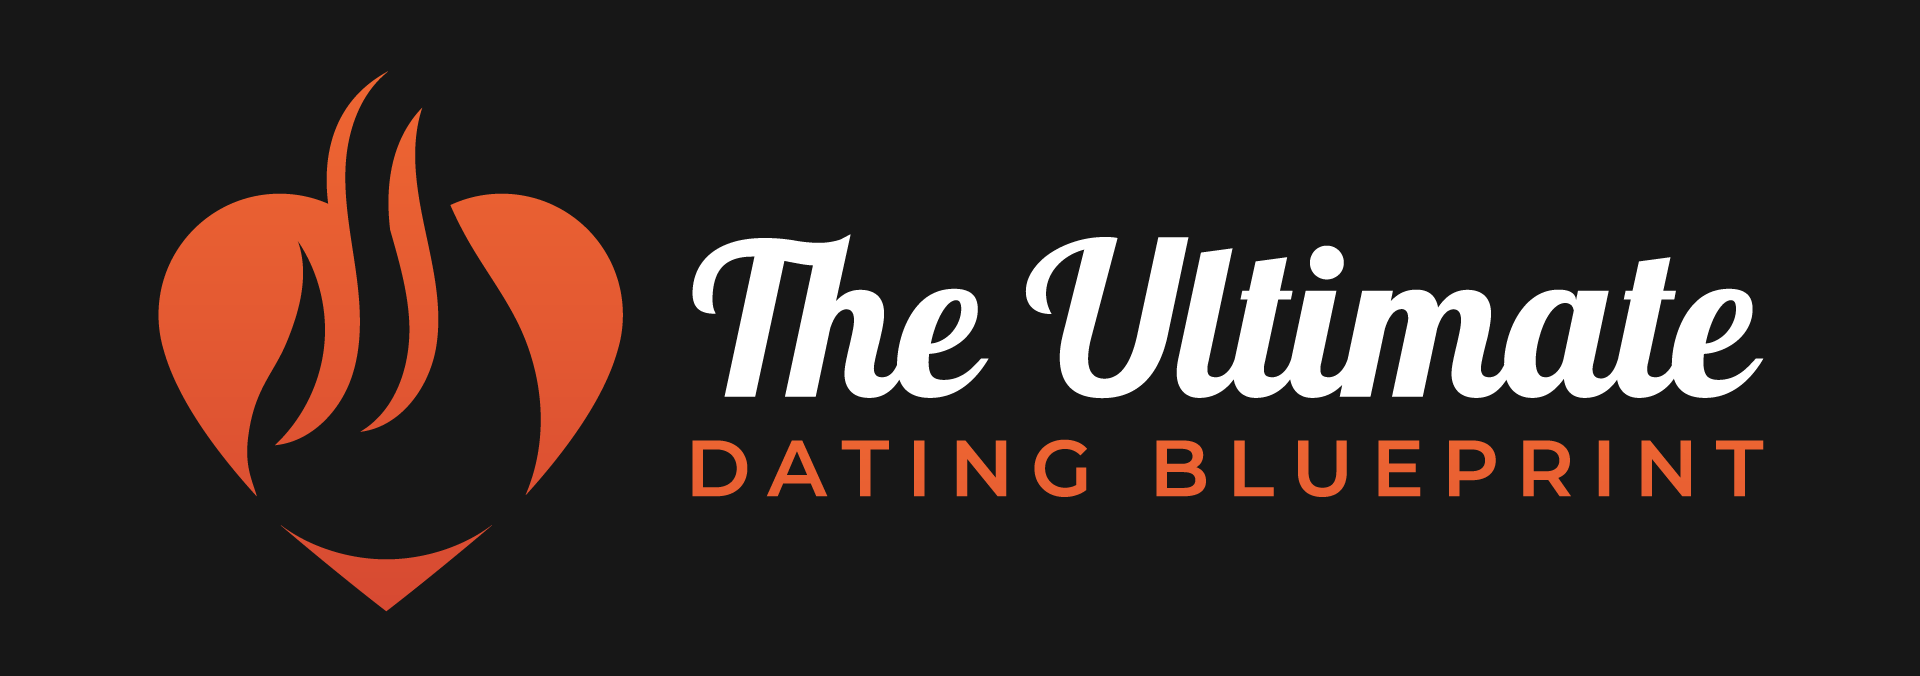 Alex - The Ultimate Dating Blueprint 2.0 